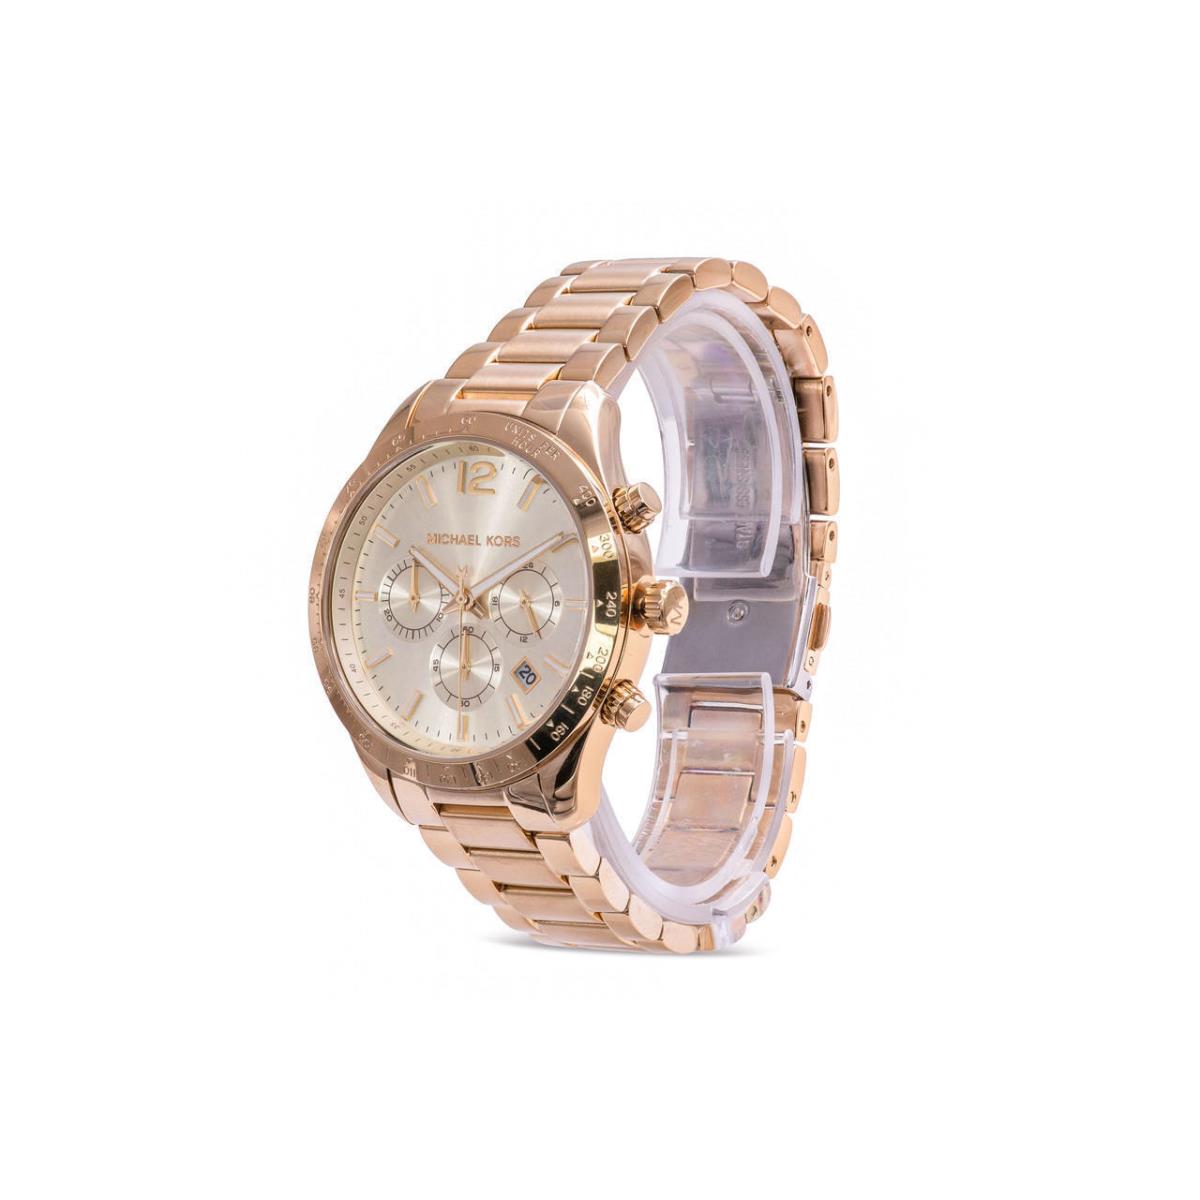 Michael Kors Layton MK6795 Gold Dial Stainless Steel Chronograph Women`s Watch - Gold Chronograph, Dial: Gold, Band: Gold